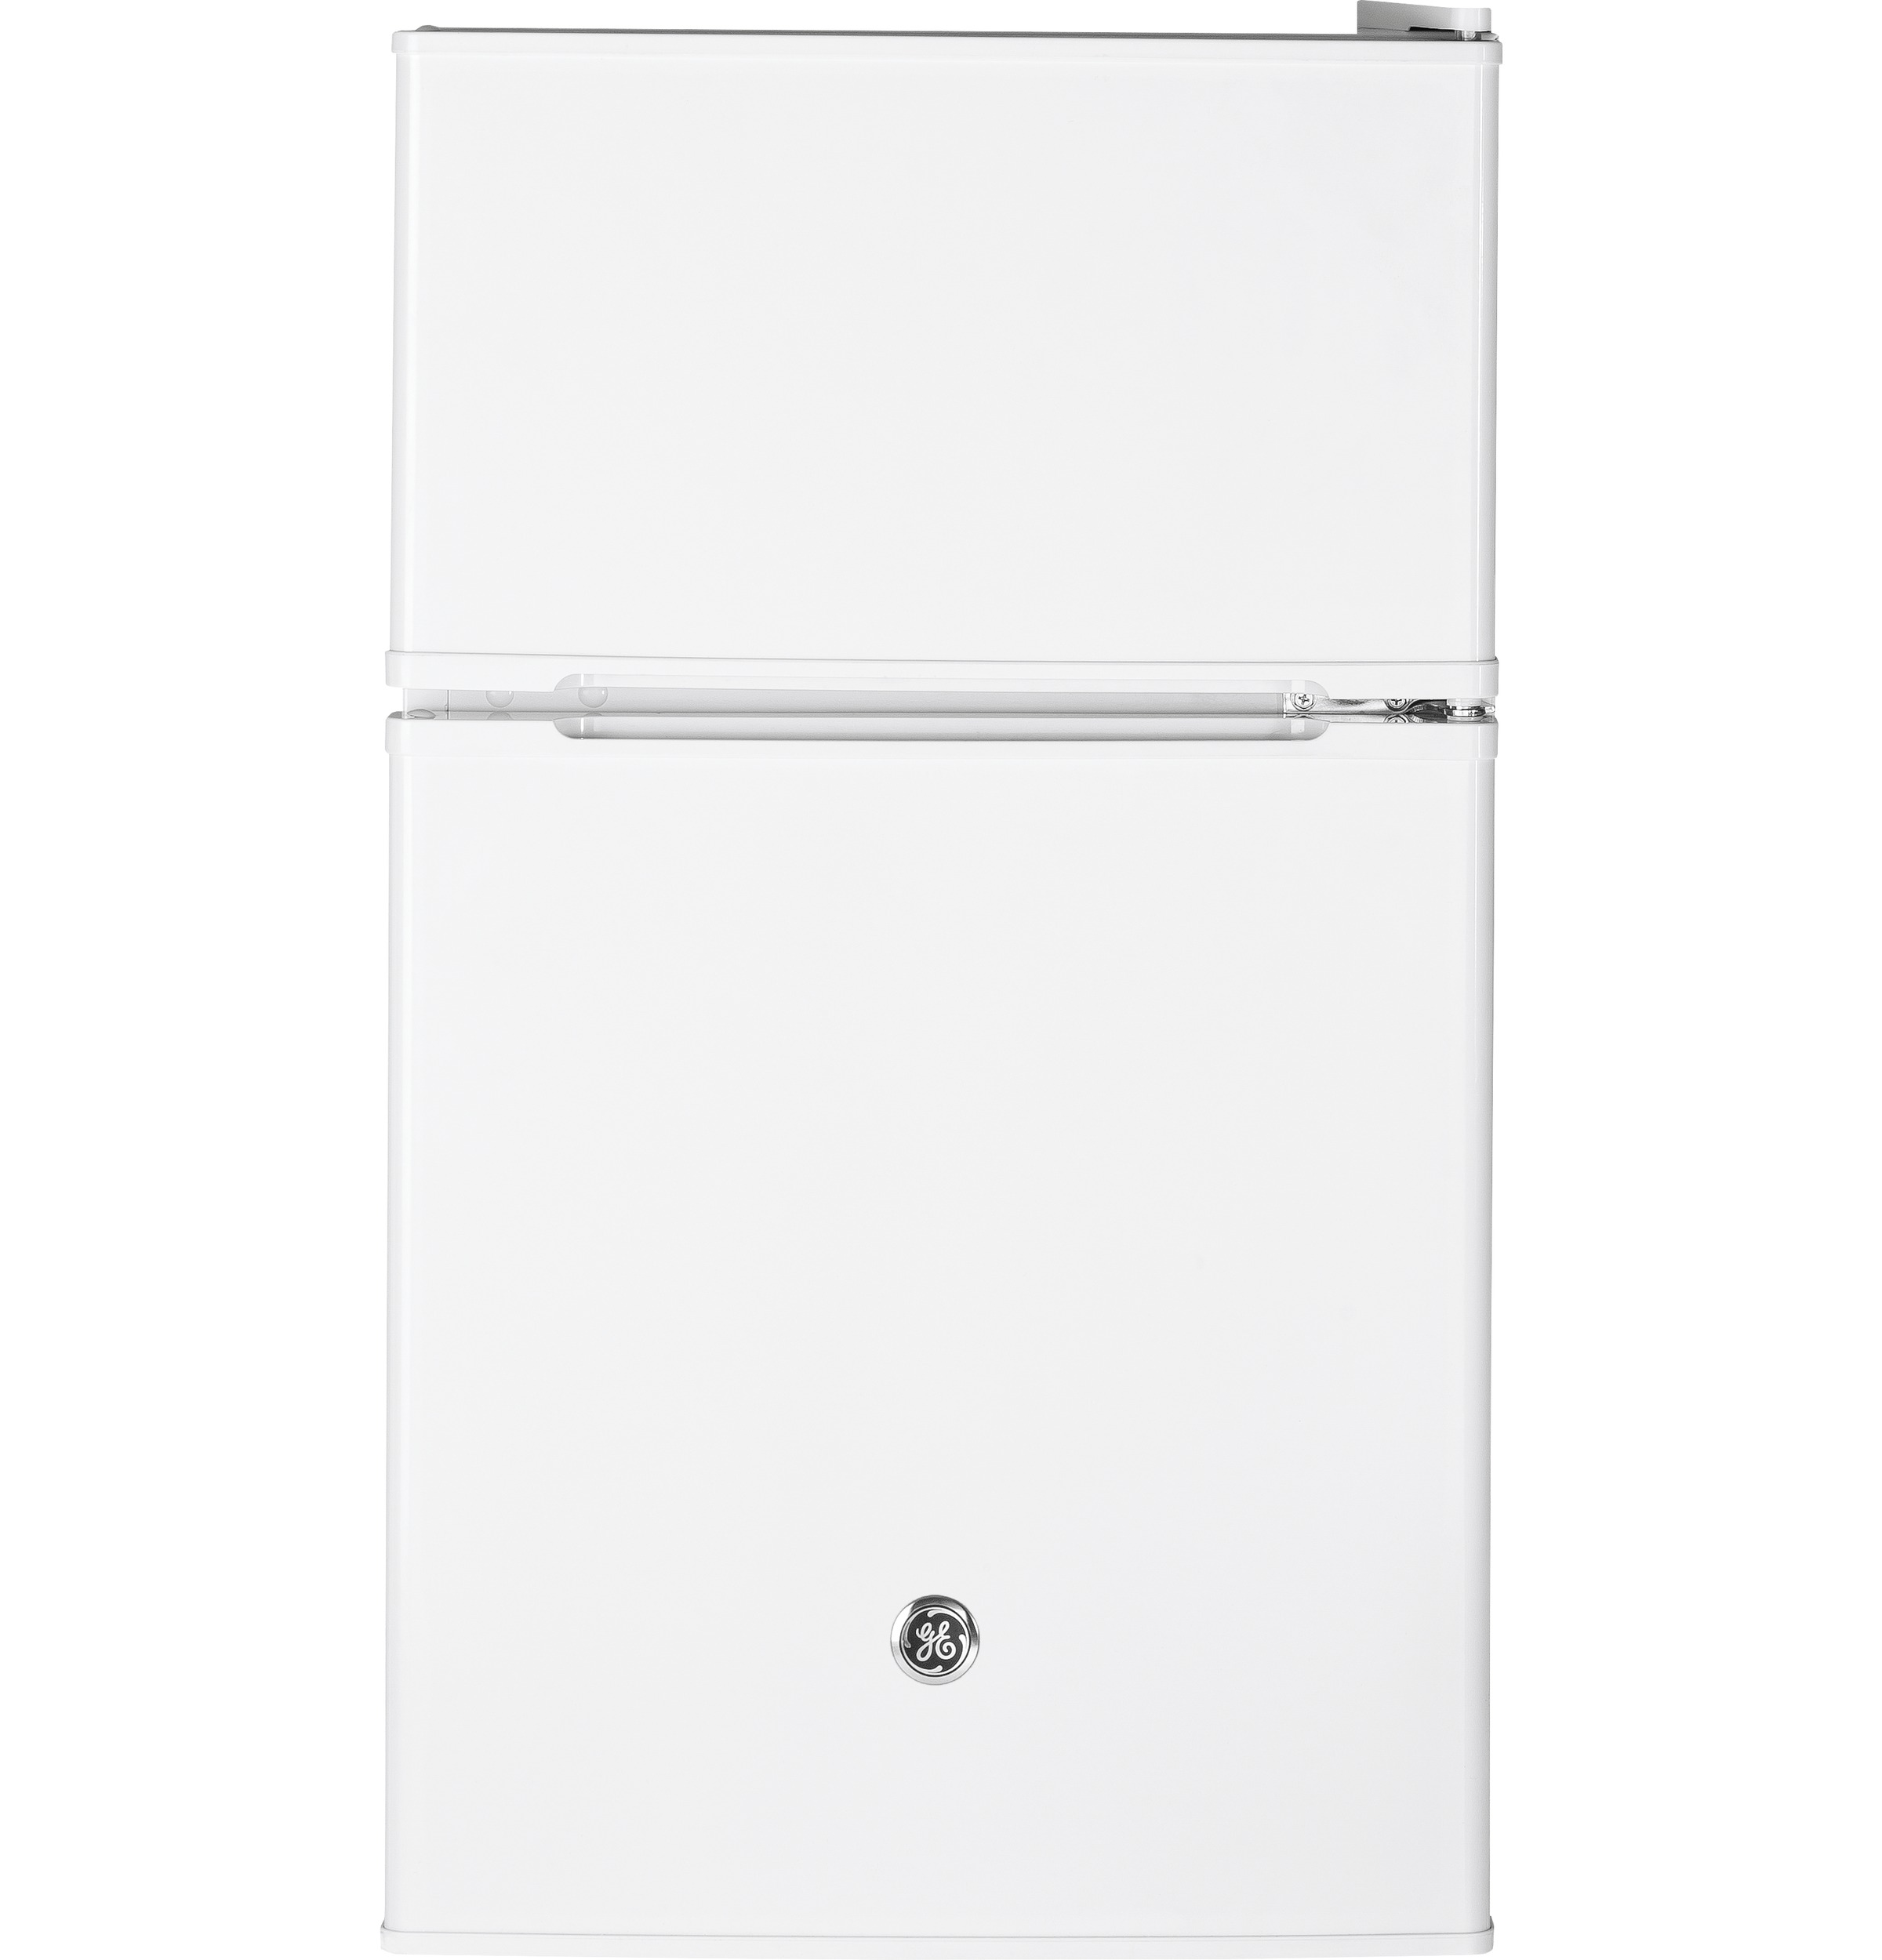 Ge Gde03gk 19" Wide 3.1 Cu. Ft. Energy Star Rated Freestanding Refrigerator - White - image 1 of 5